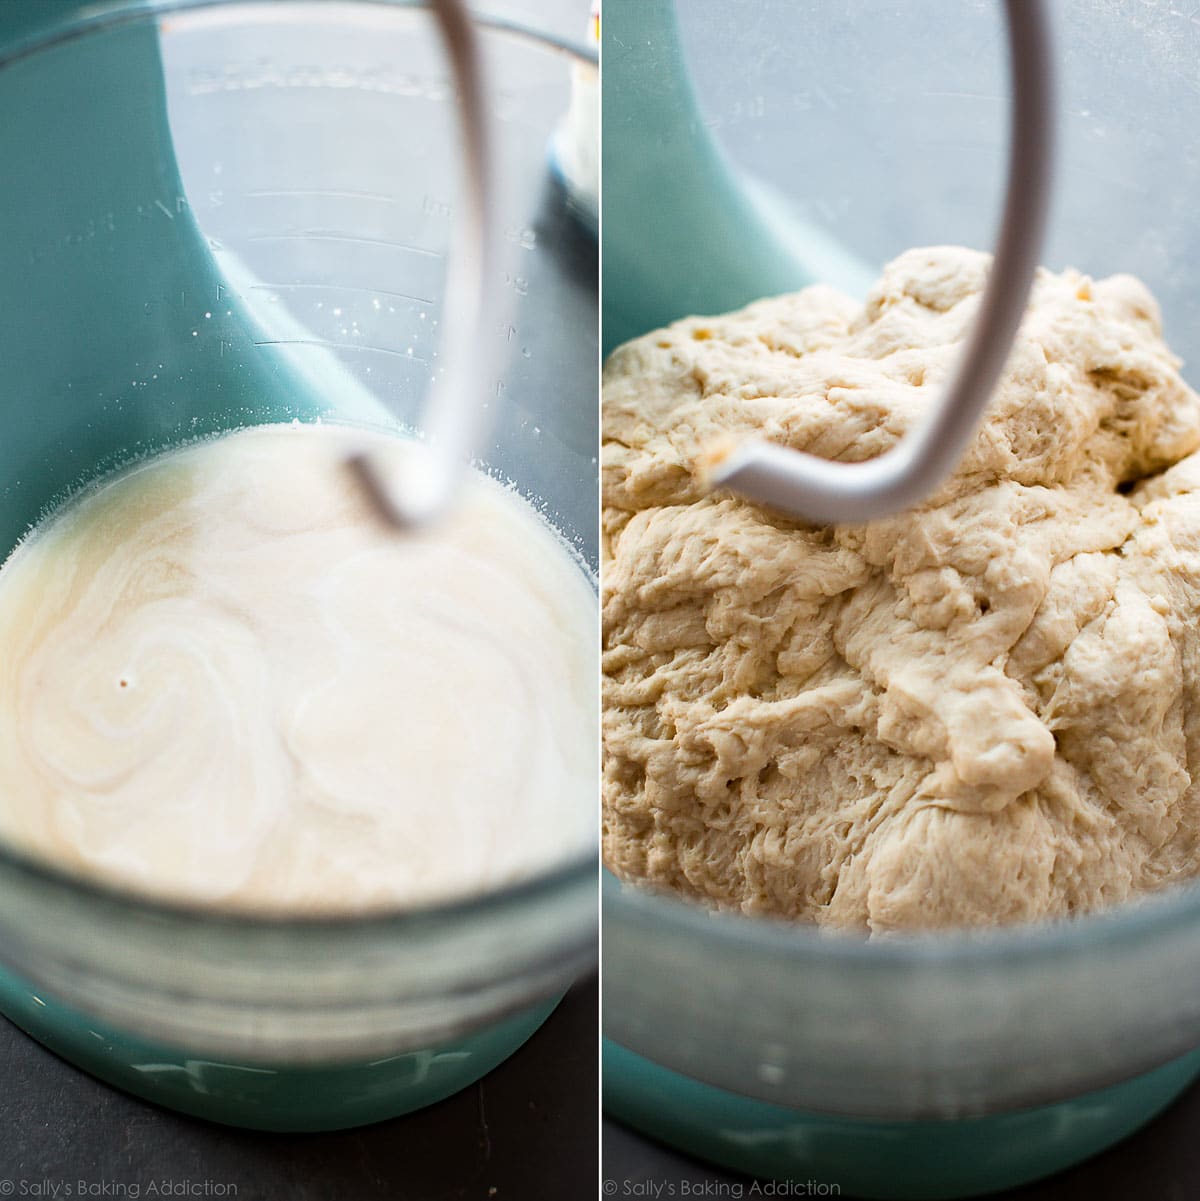 2 images of yeast mixture in glass bowl and bread bowls dough in glass bowl